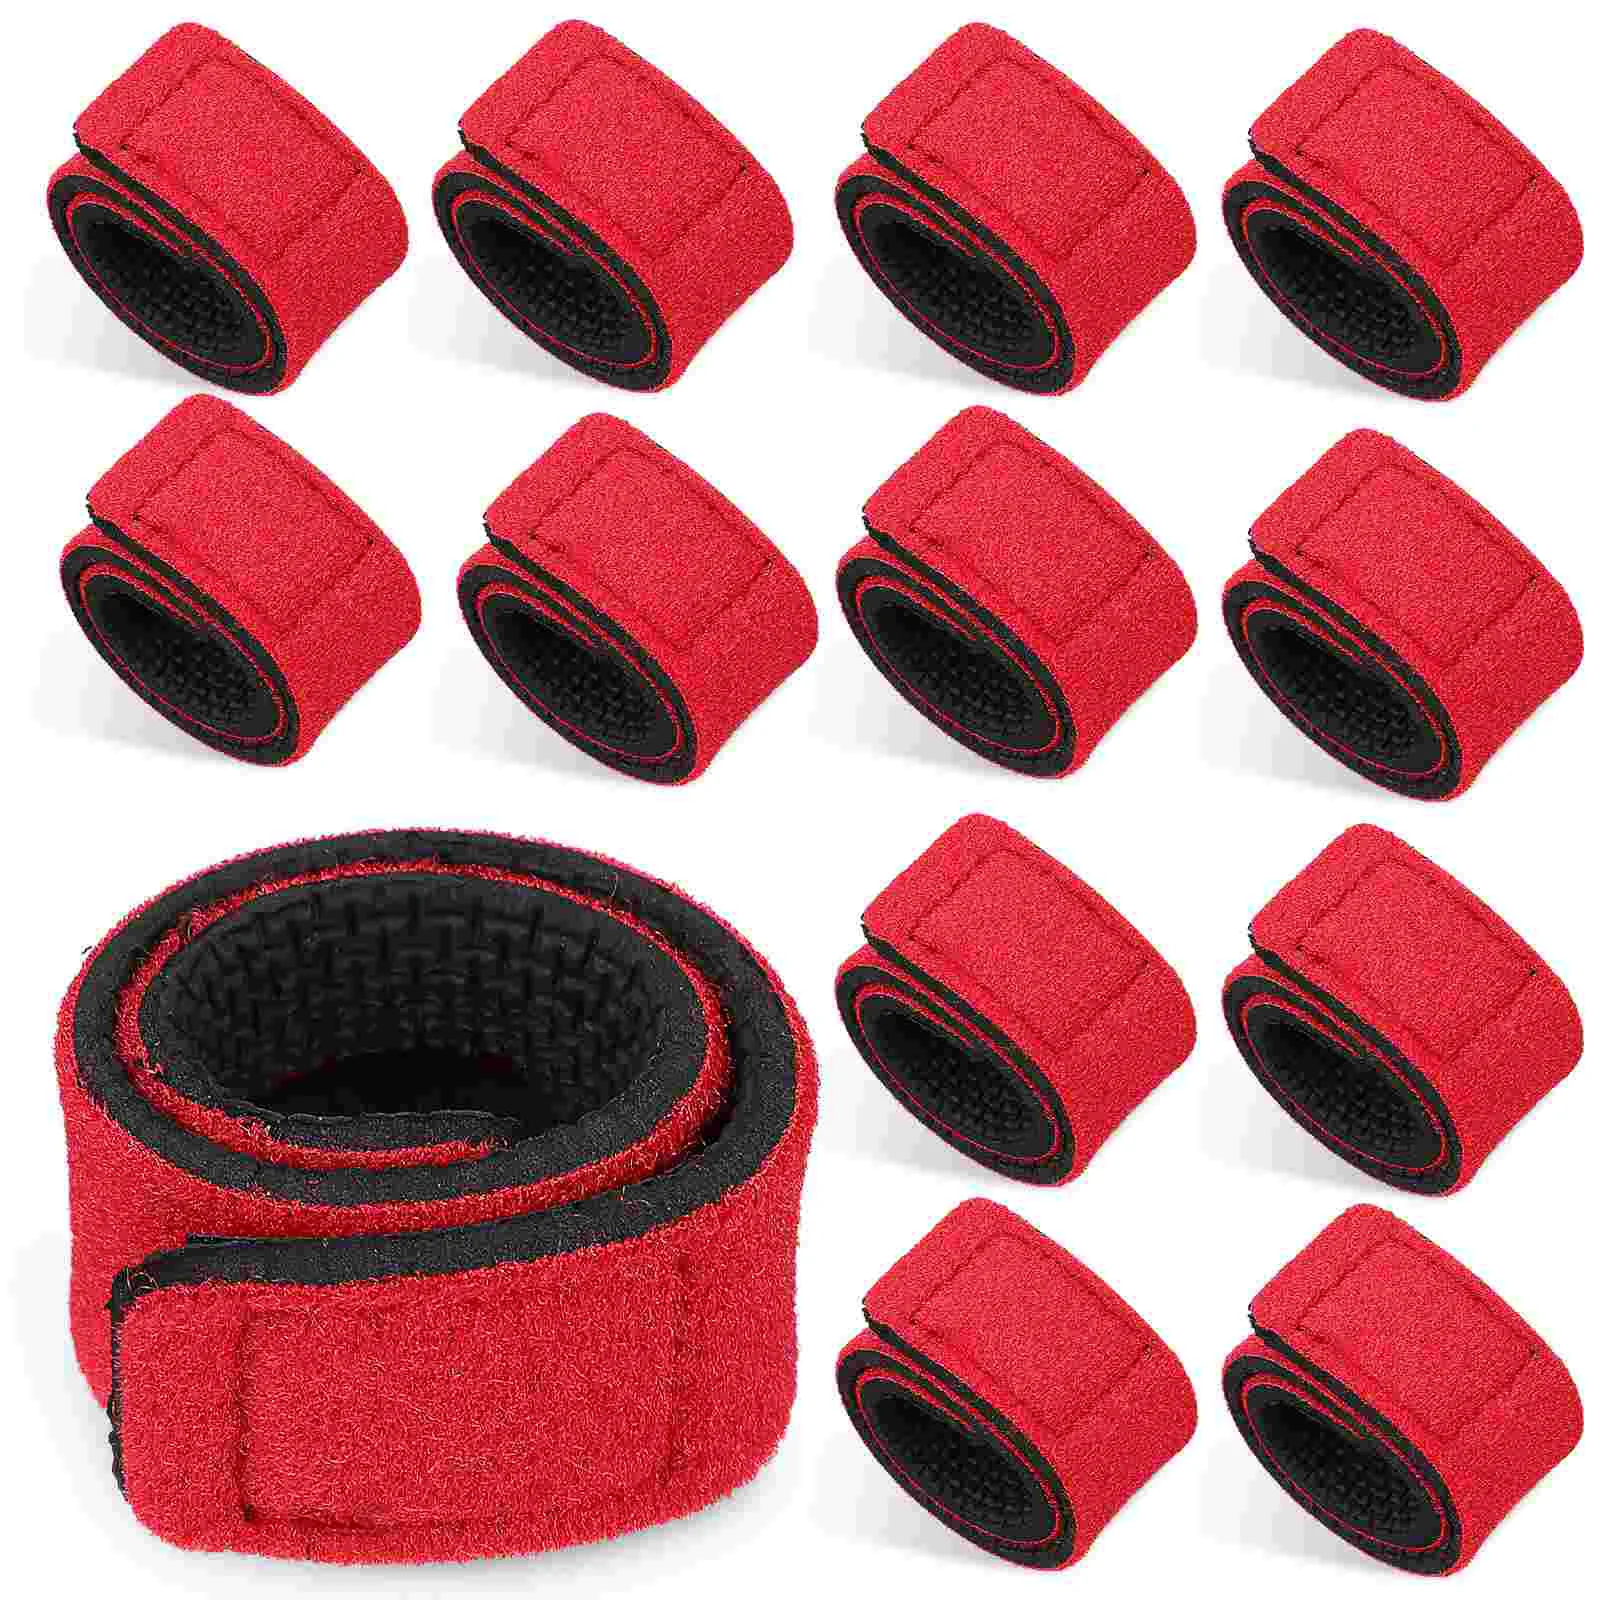 

10 Pcs Fishing Rod Strap Accessories Bandage Fixing Bandages Outdoor Ok Cloth Pole Straps Supplies Ties